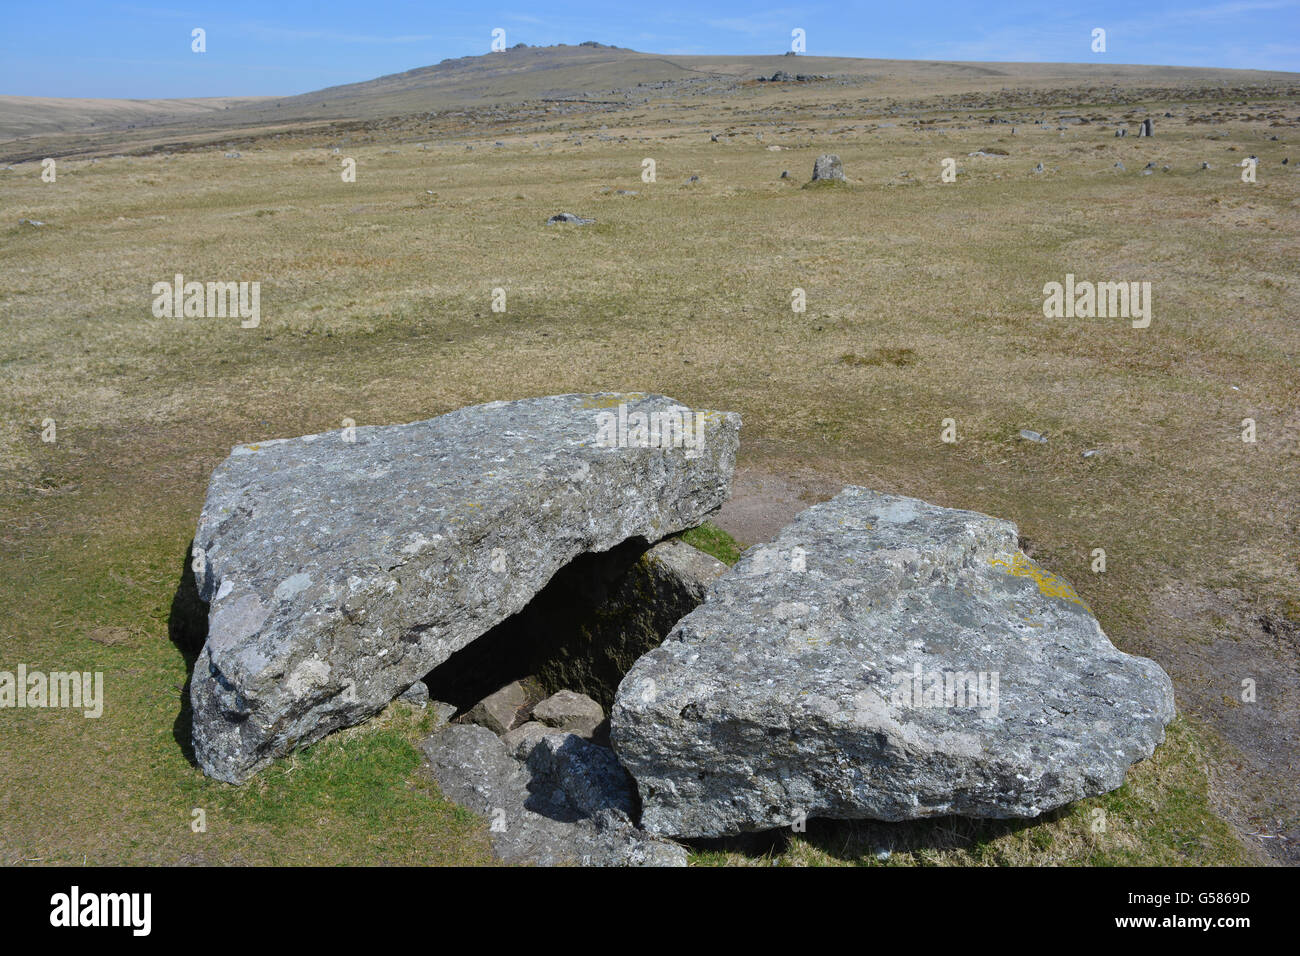 Stone lined burial Chamber, or cist, on Longash Common, Merrivale Settlement Site, Dartmoor National Park, Devon, England Stock Photo